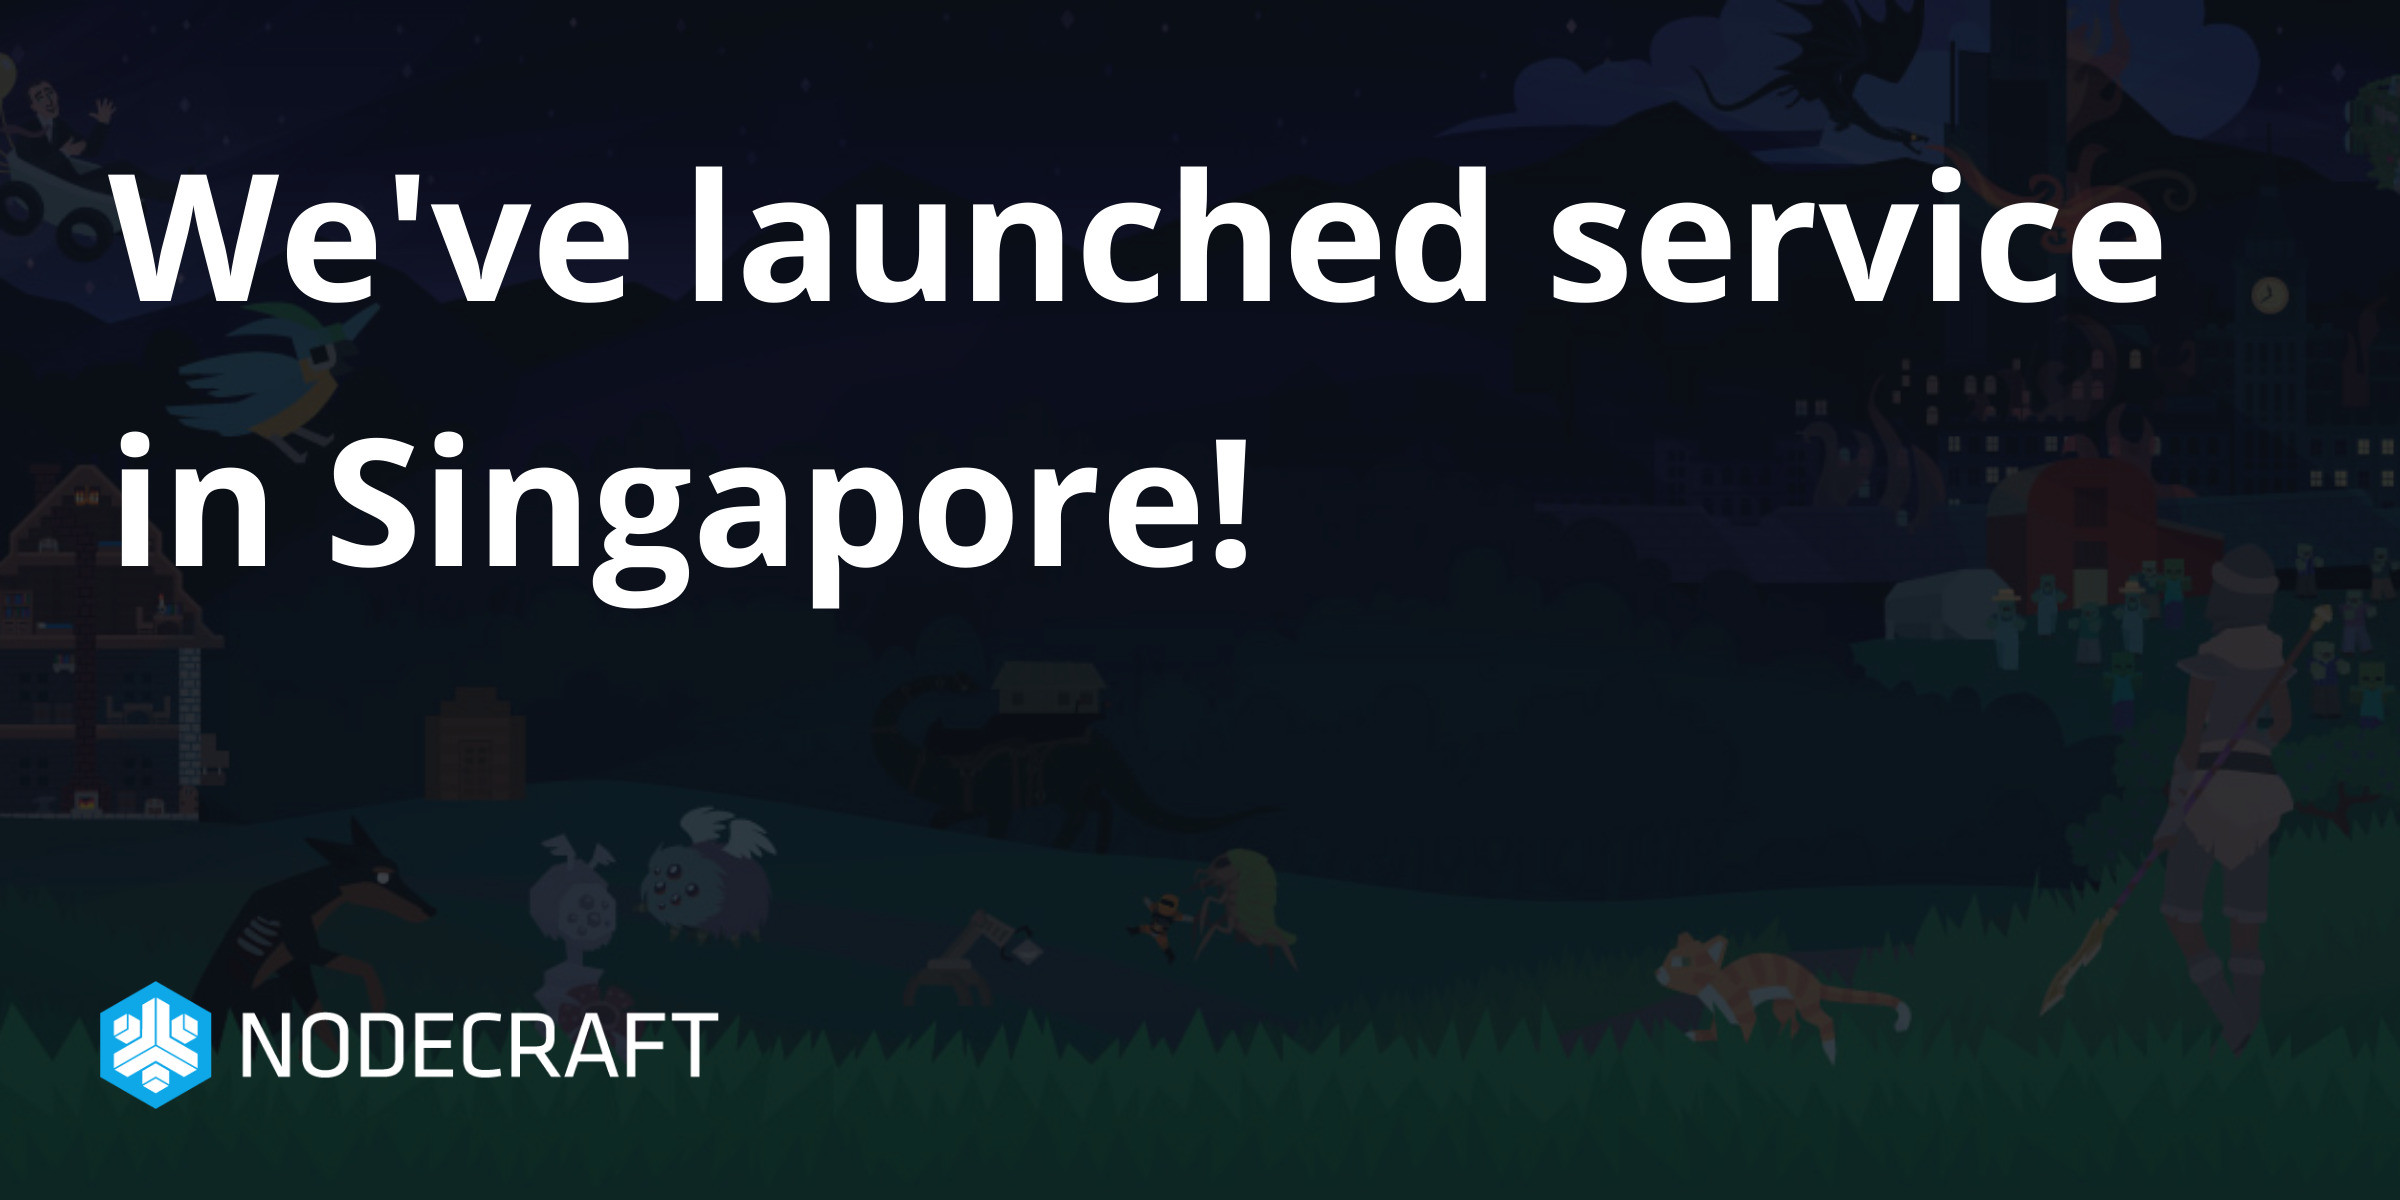 We've launched service in Singapore!